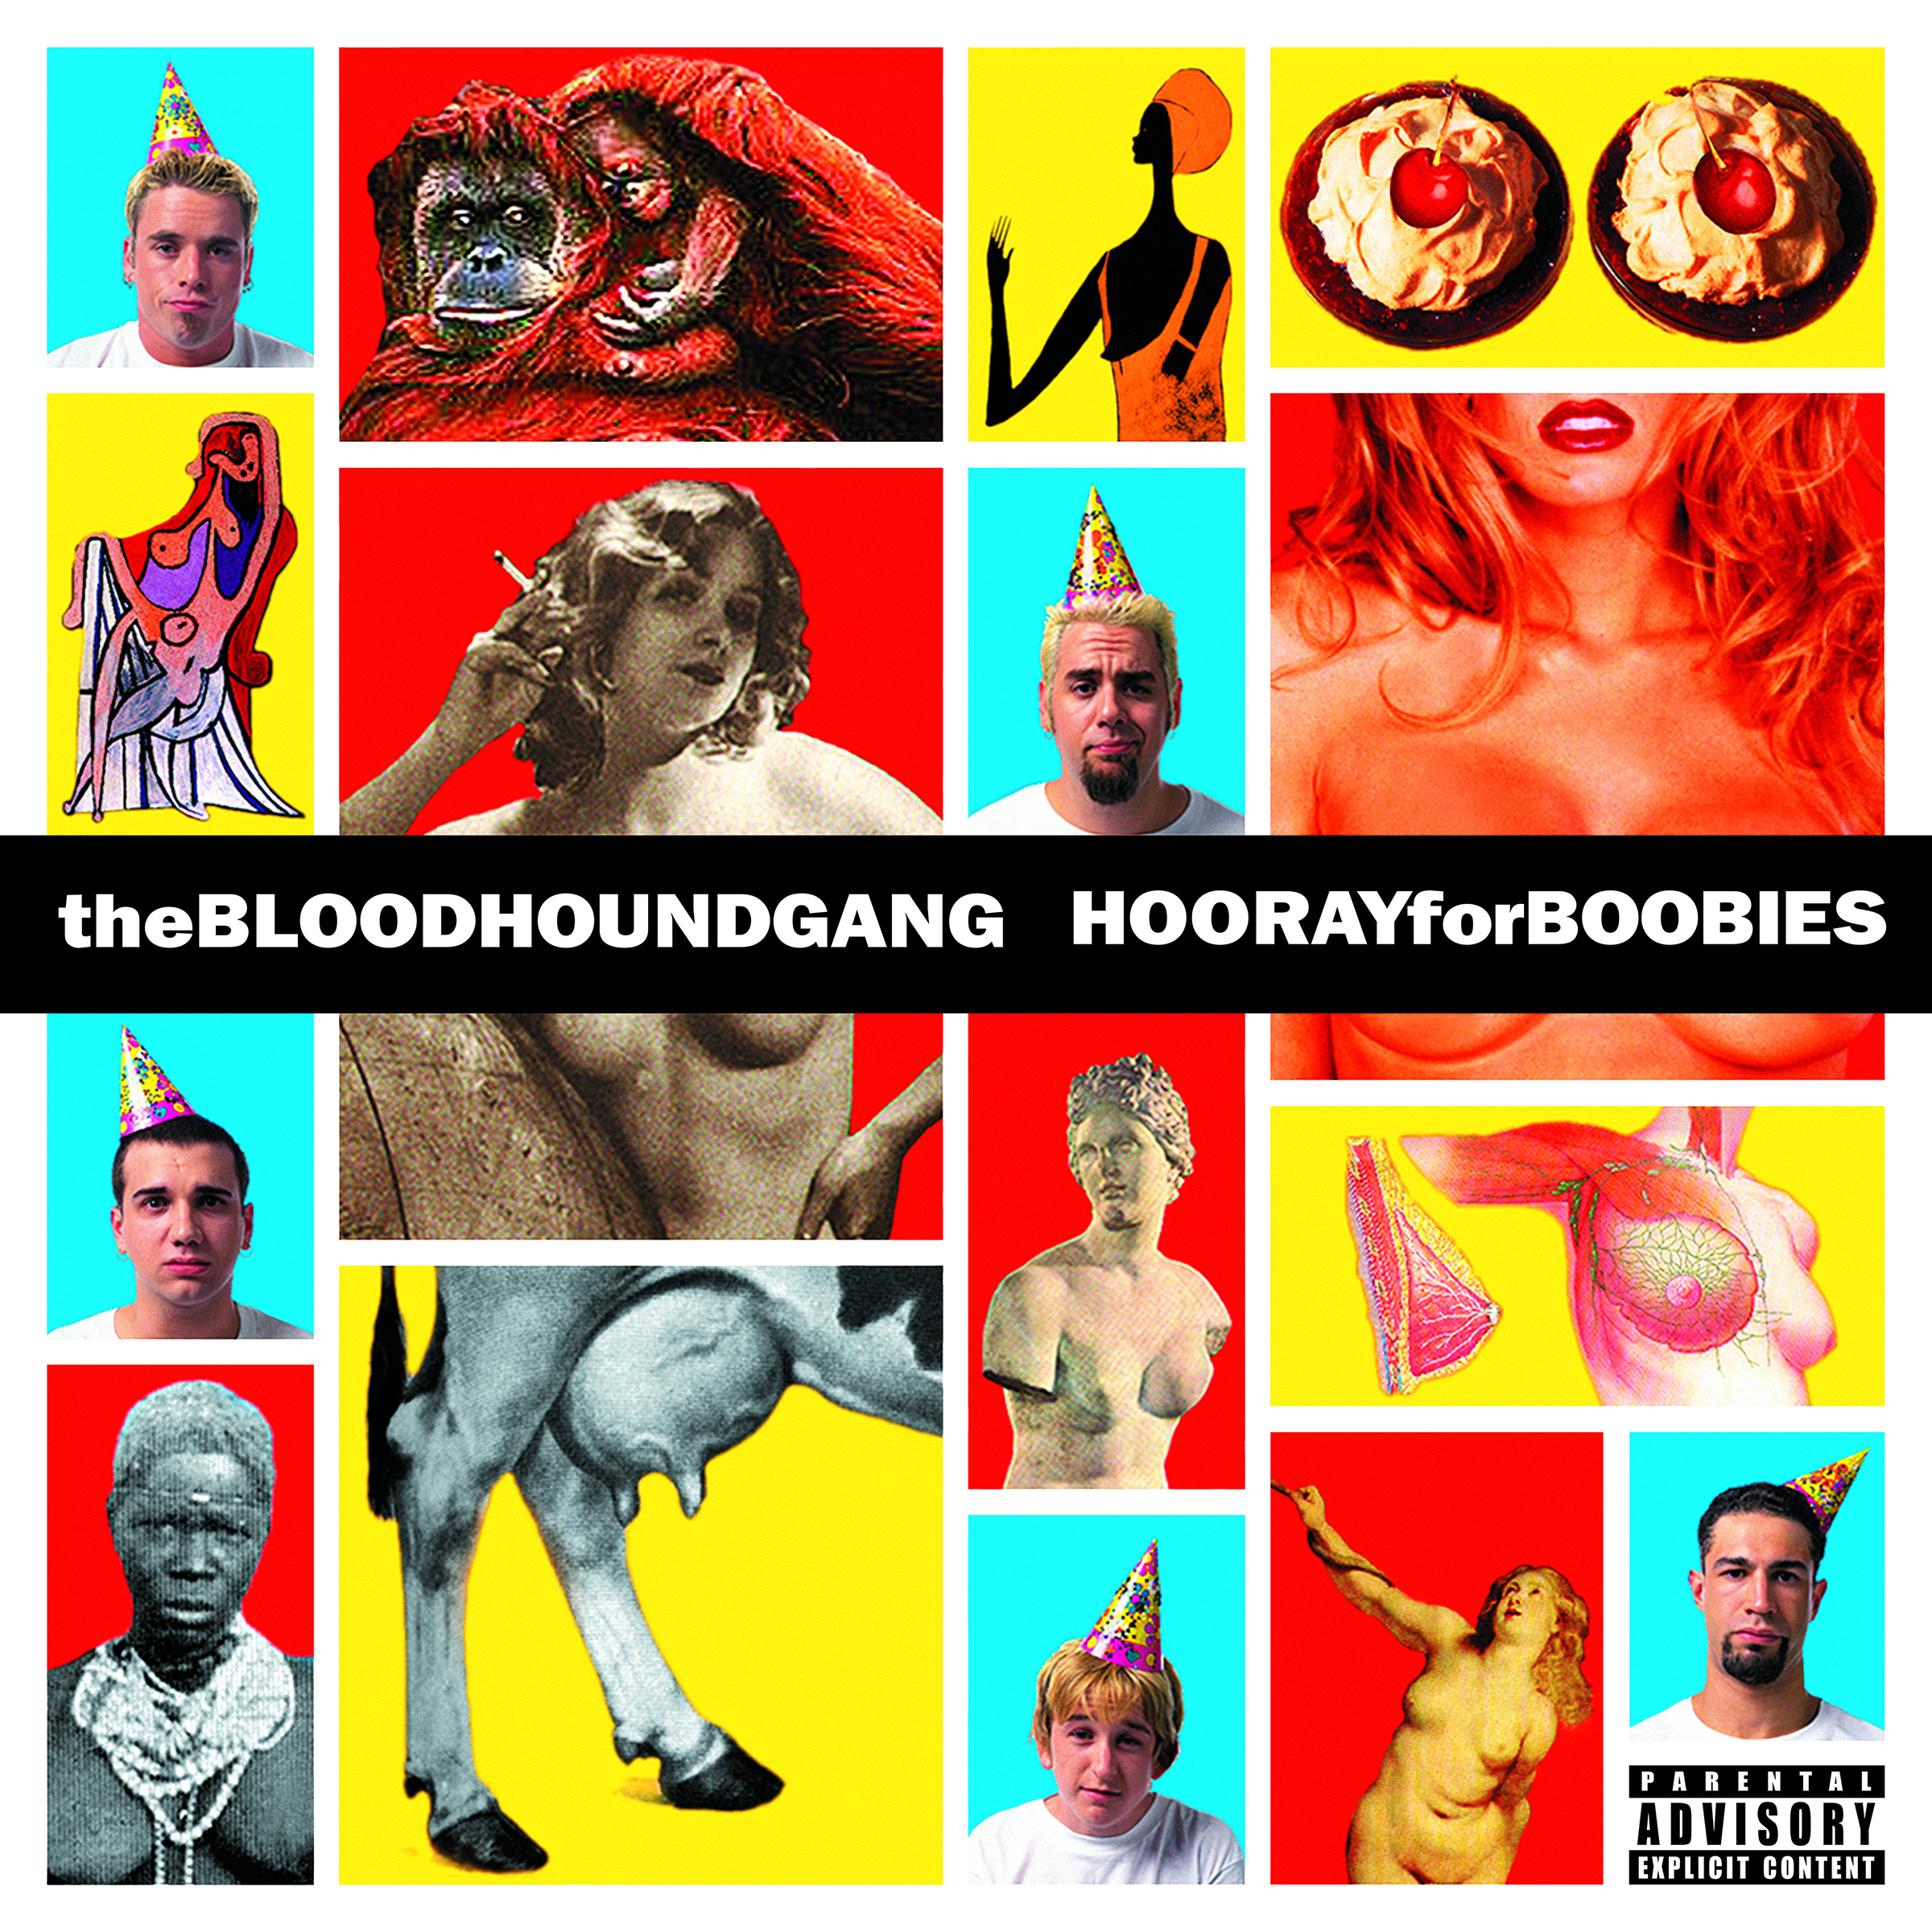 BLOODHOUND GANG "HOORAY FOR BOOBIES (Expanded Vinyl Reissue)"  Available March 27th